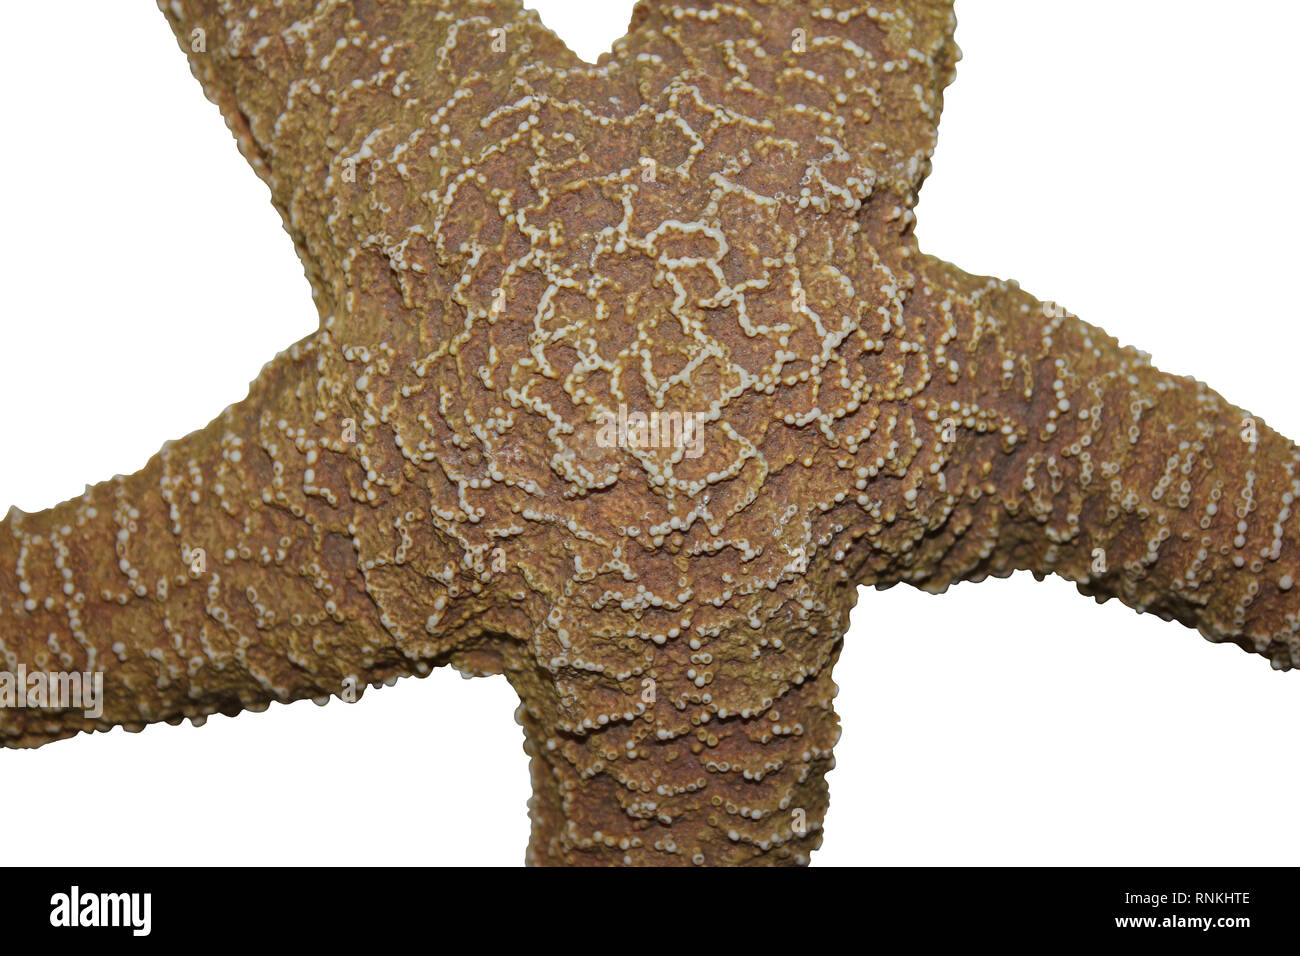 Starfish In Detail Isolated on White Background Stock Photo